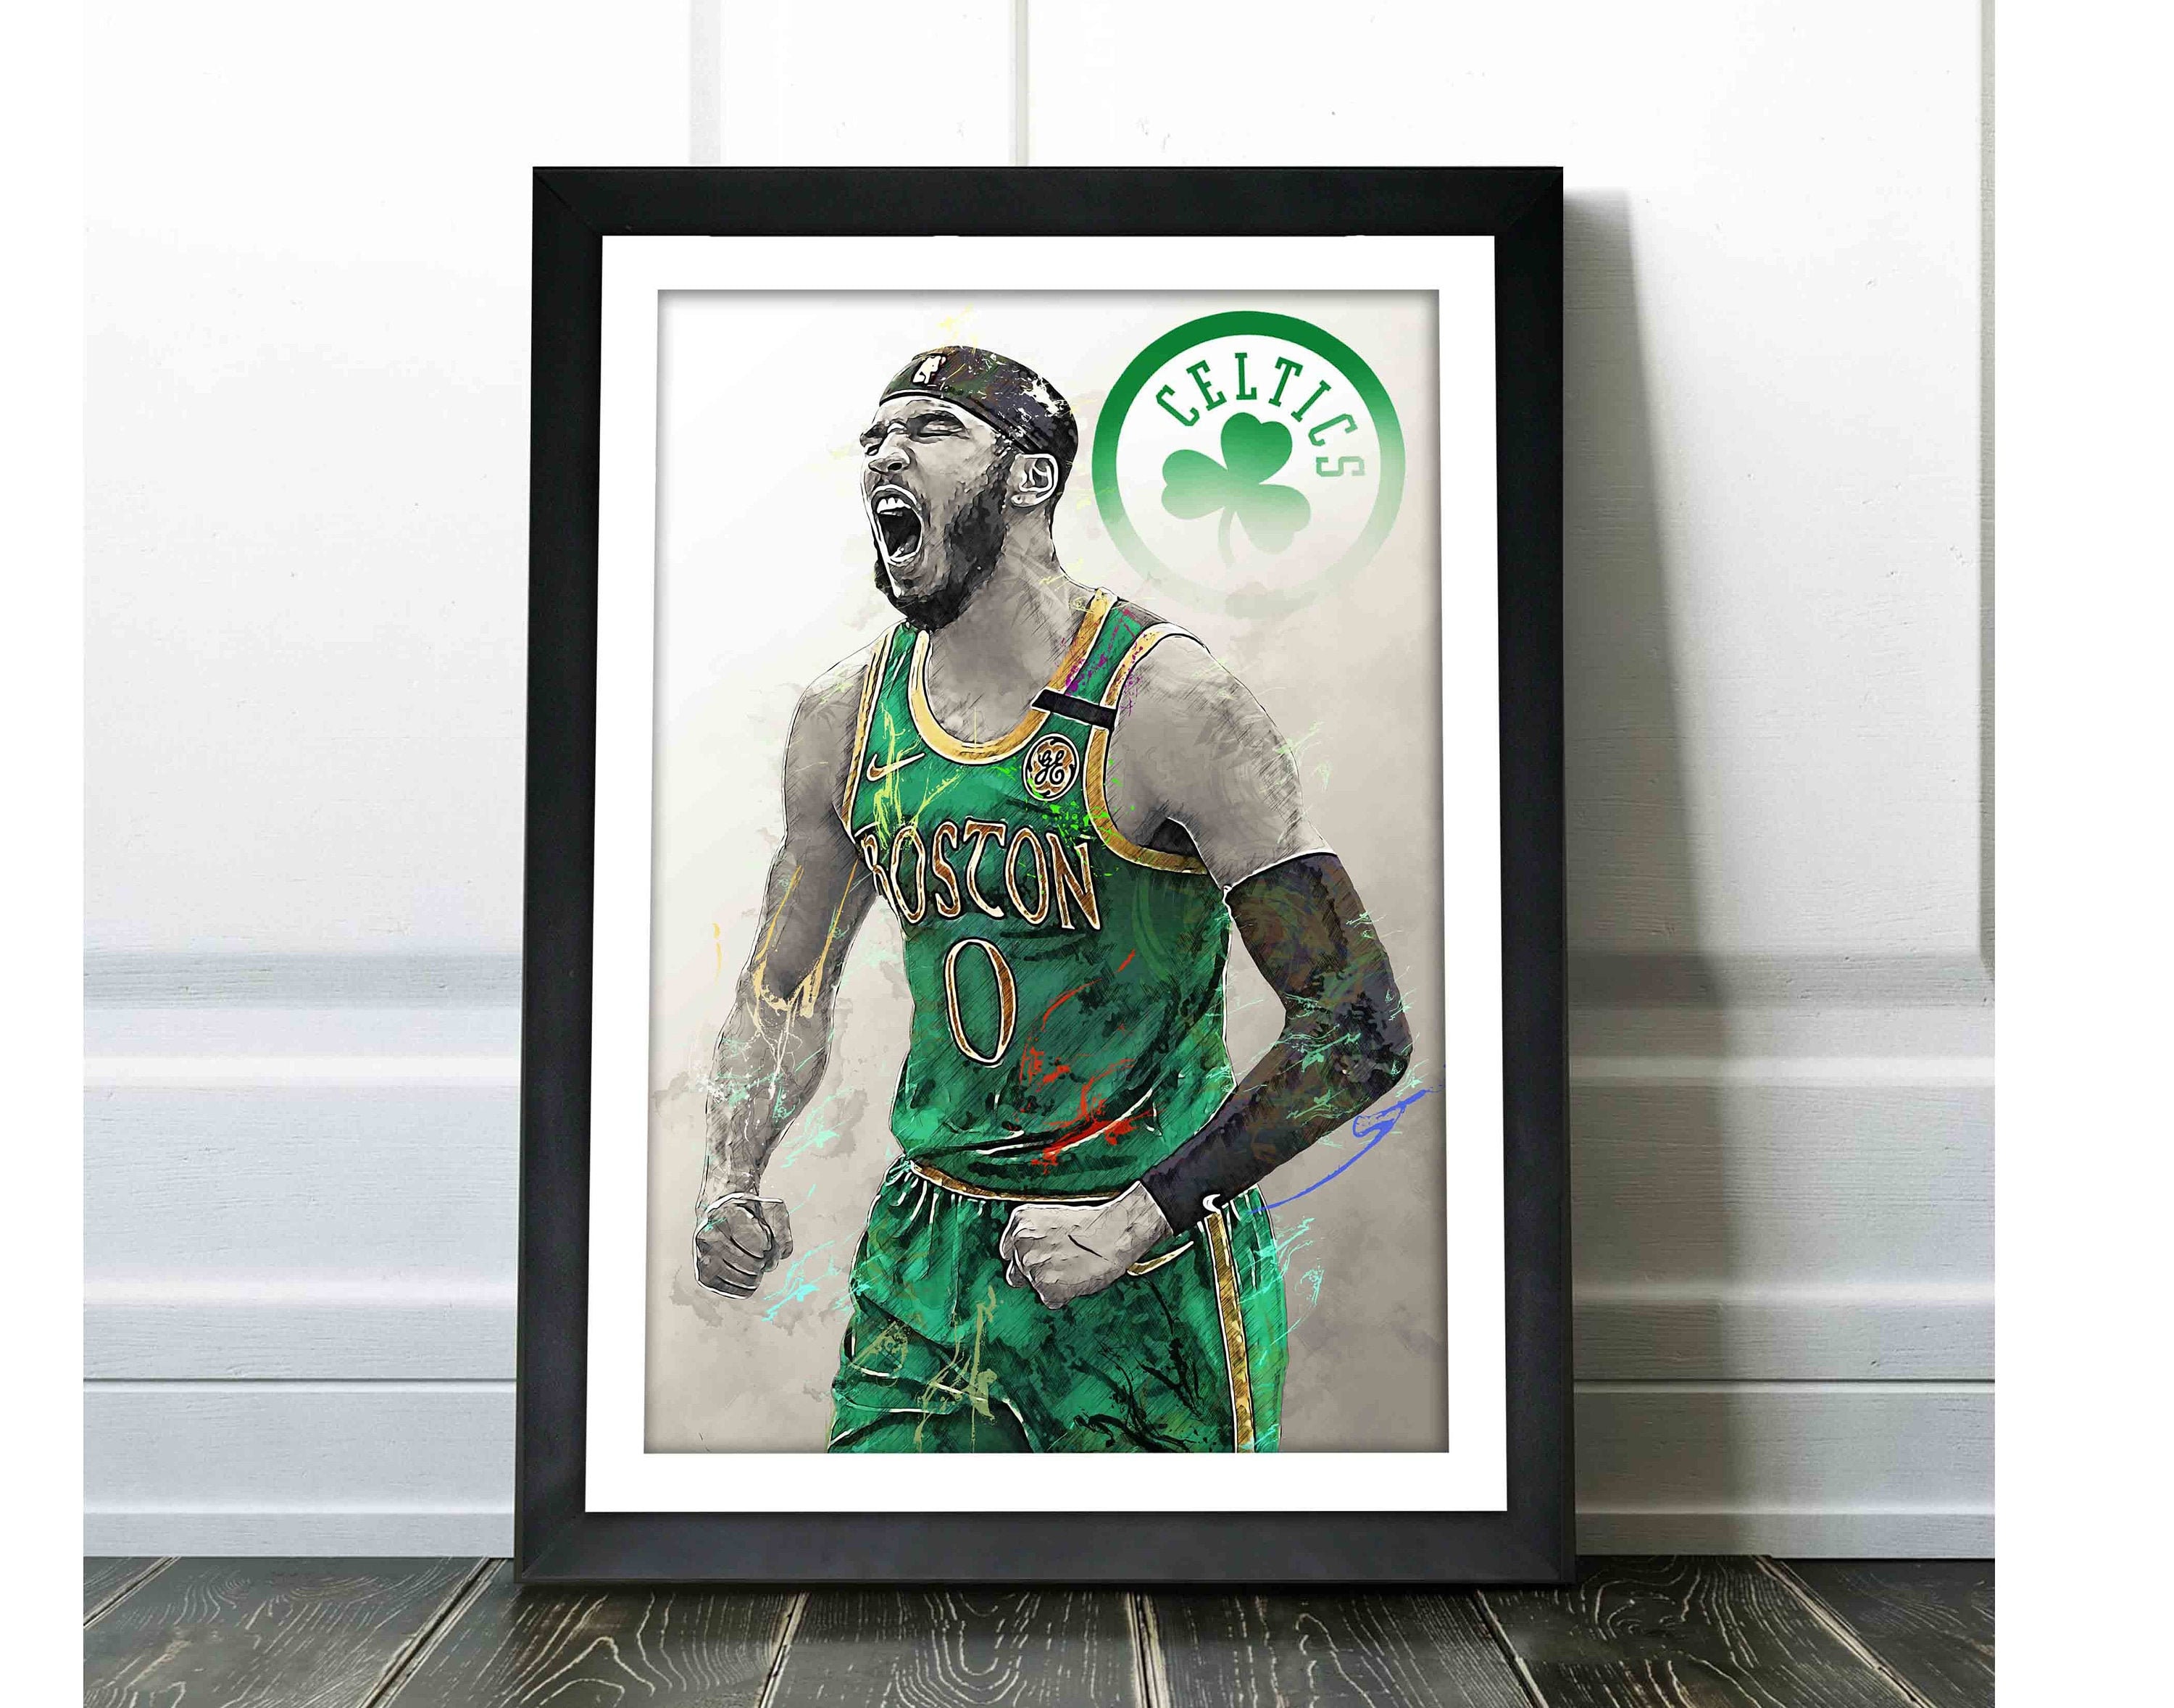  bcf Jayson Tatum Poster Wall Art Prints,Jayson Tatum Cool HD  Basketball Inspirational Canvas Poster for Boys Bedroom Living Room Offices  Dorm Room Decoration Gift,16 x 24inch,Unframe.: Posters & Prints